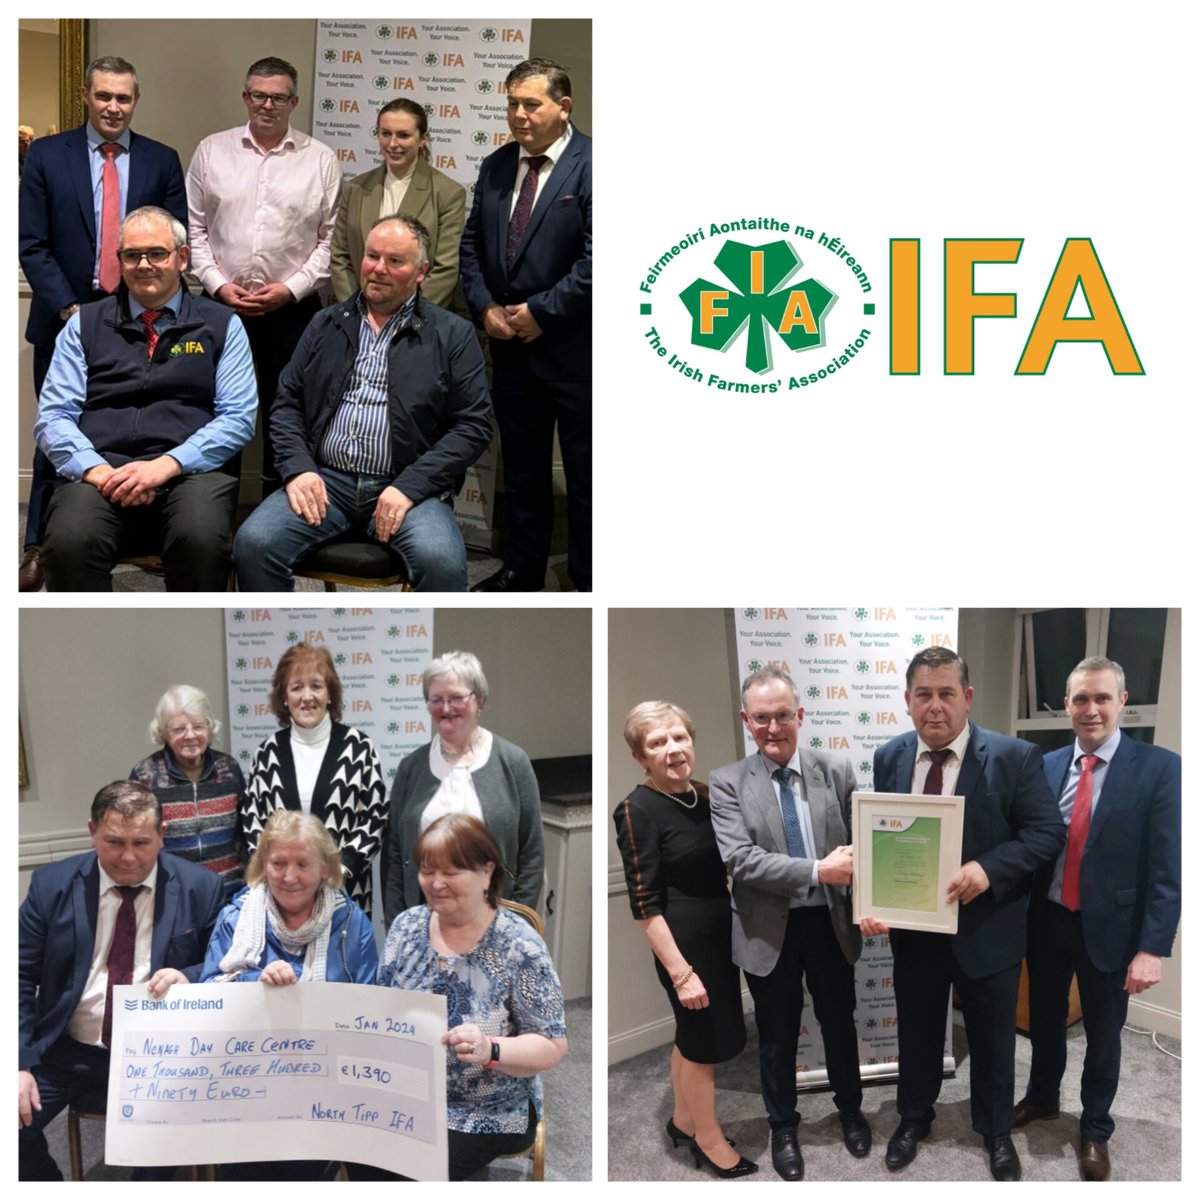 Busy evening at the North Tipp @IFAmedia Co Exe AGM with @buckleytadhg as guest speaker. Also Honorary Life Membership to former chair Declan O'Meara & presentation to Nenagh Day Care Centre. @TippFM @NenaghGuardian